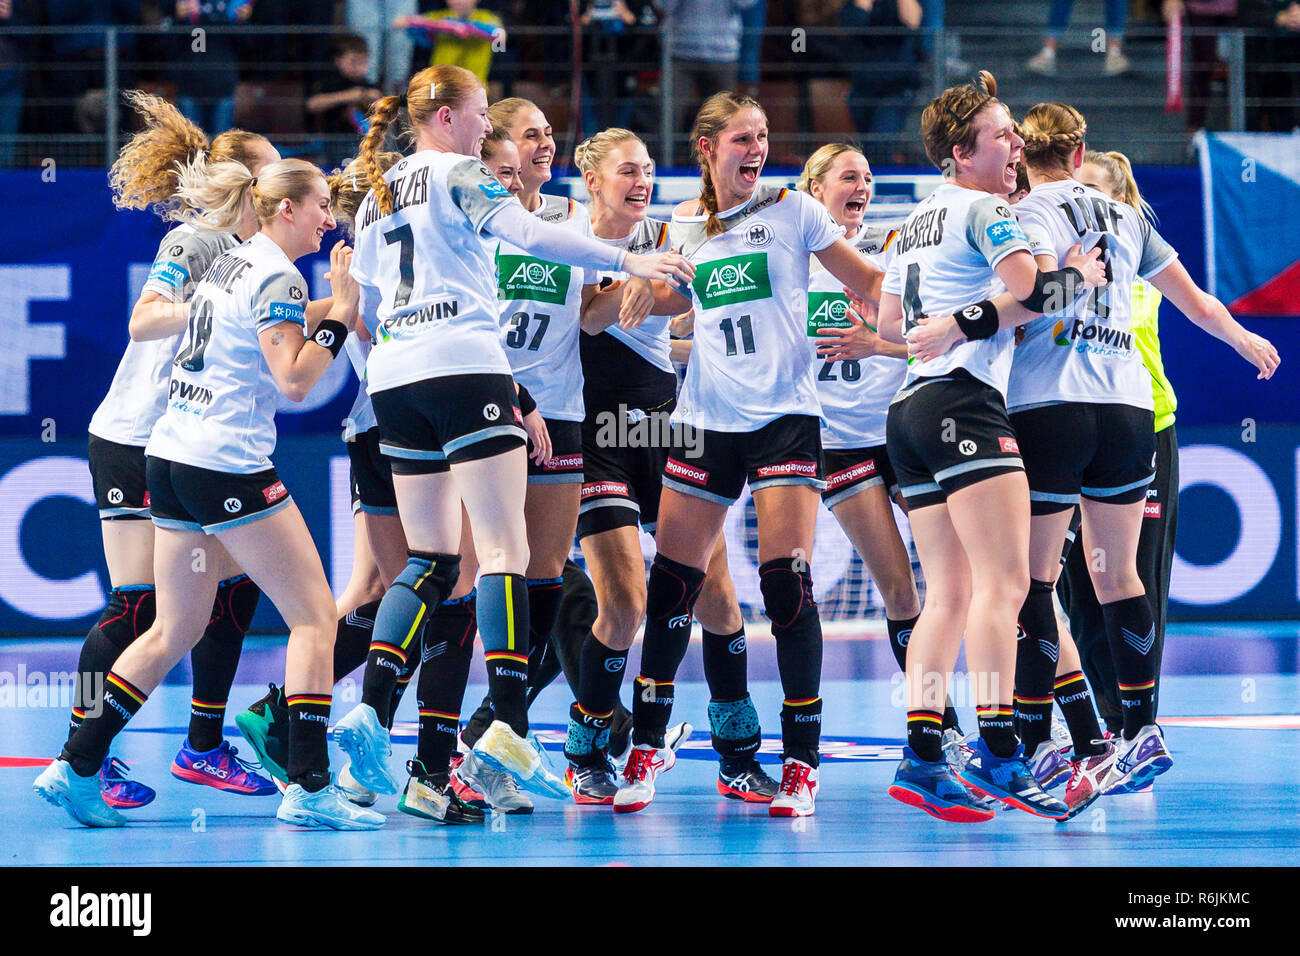 05 December 2018, France (France), Brest: Handball, women: EM, Germany -  Czech Republic preliminary round, group D, 3rd matchday in the Brest Arena.  The German players cheer for their victory after the